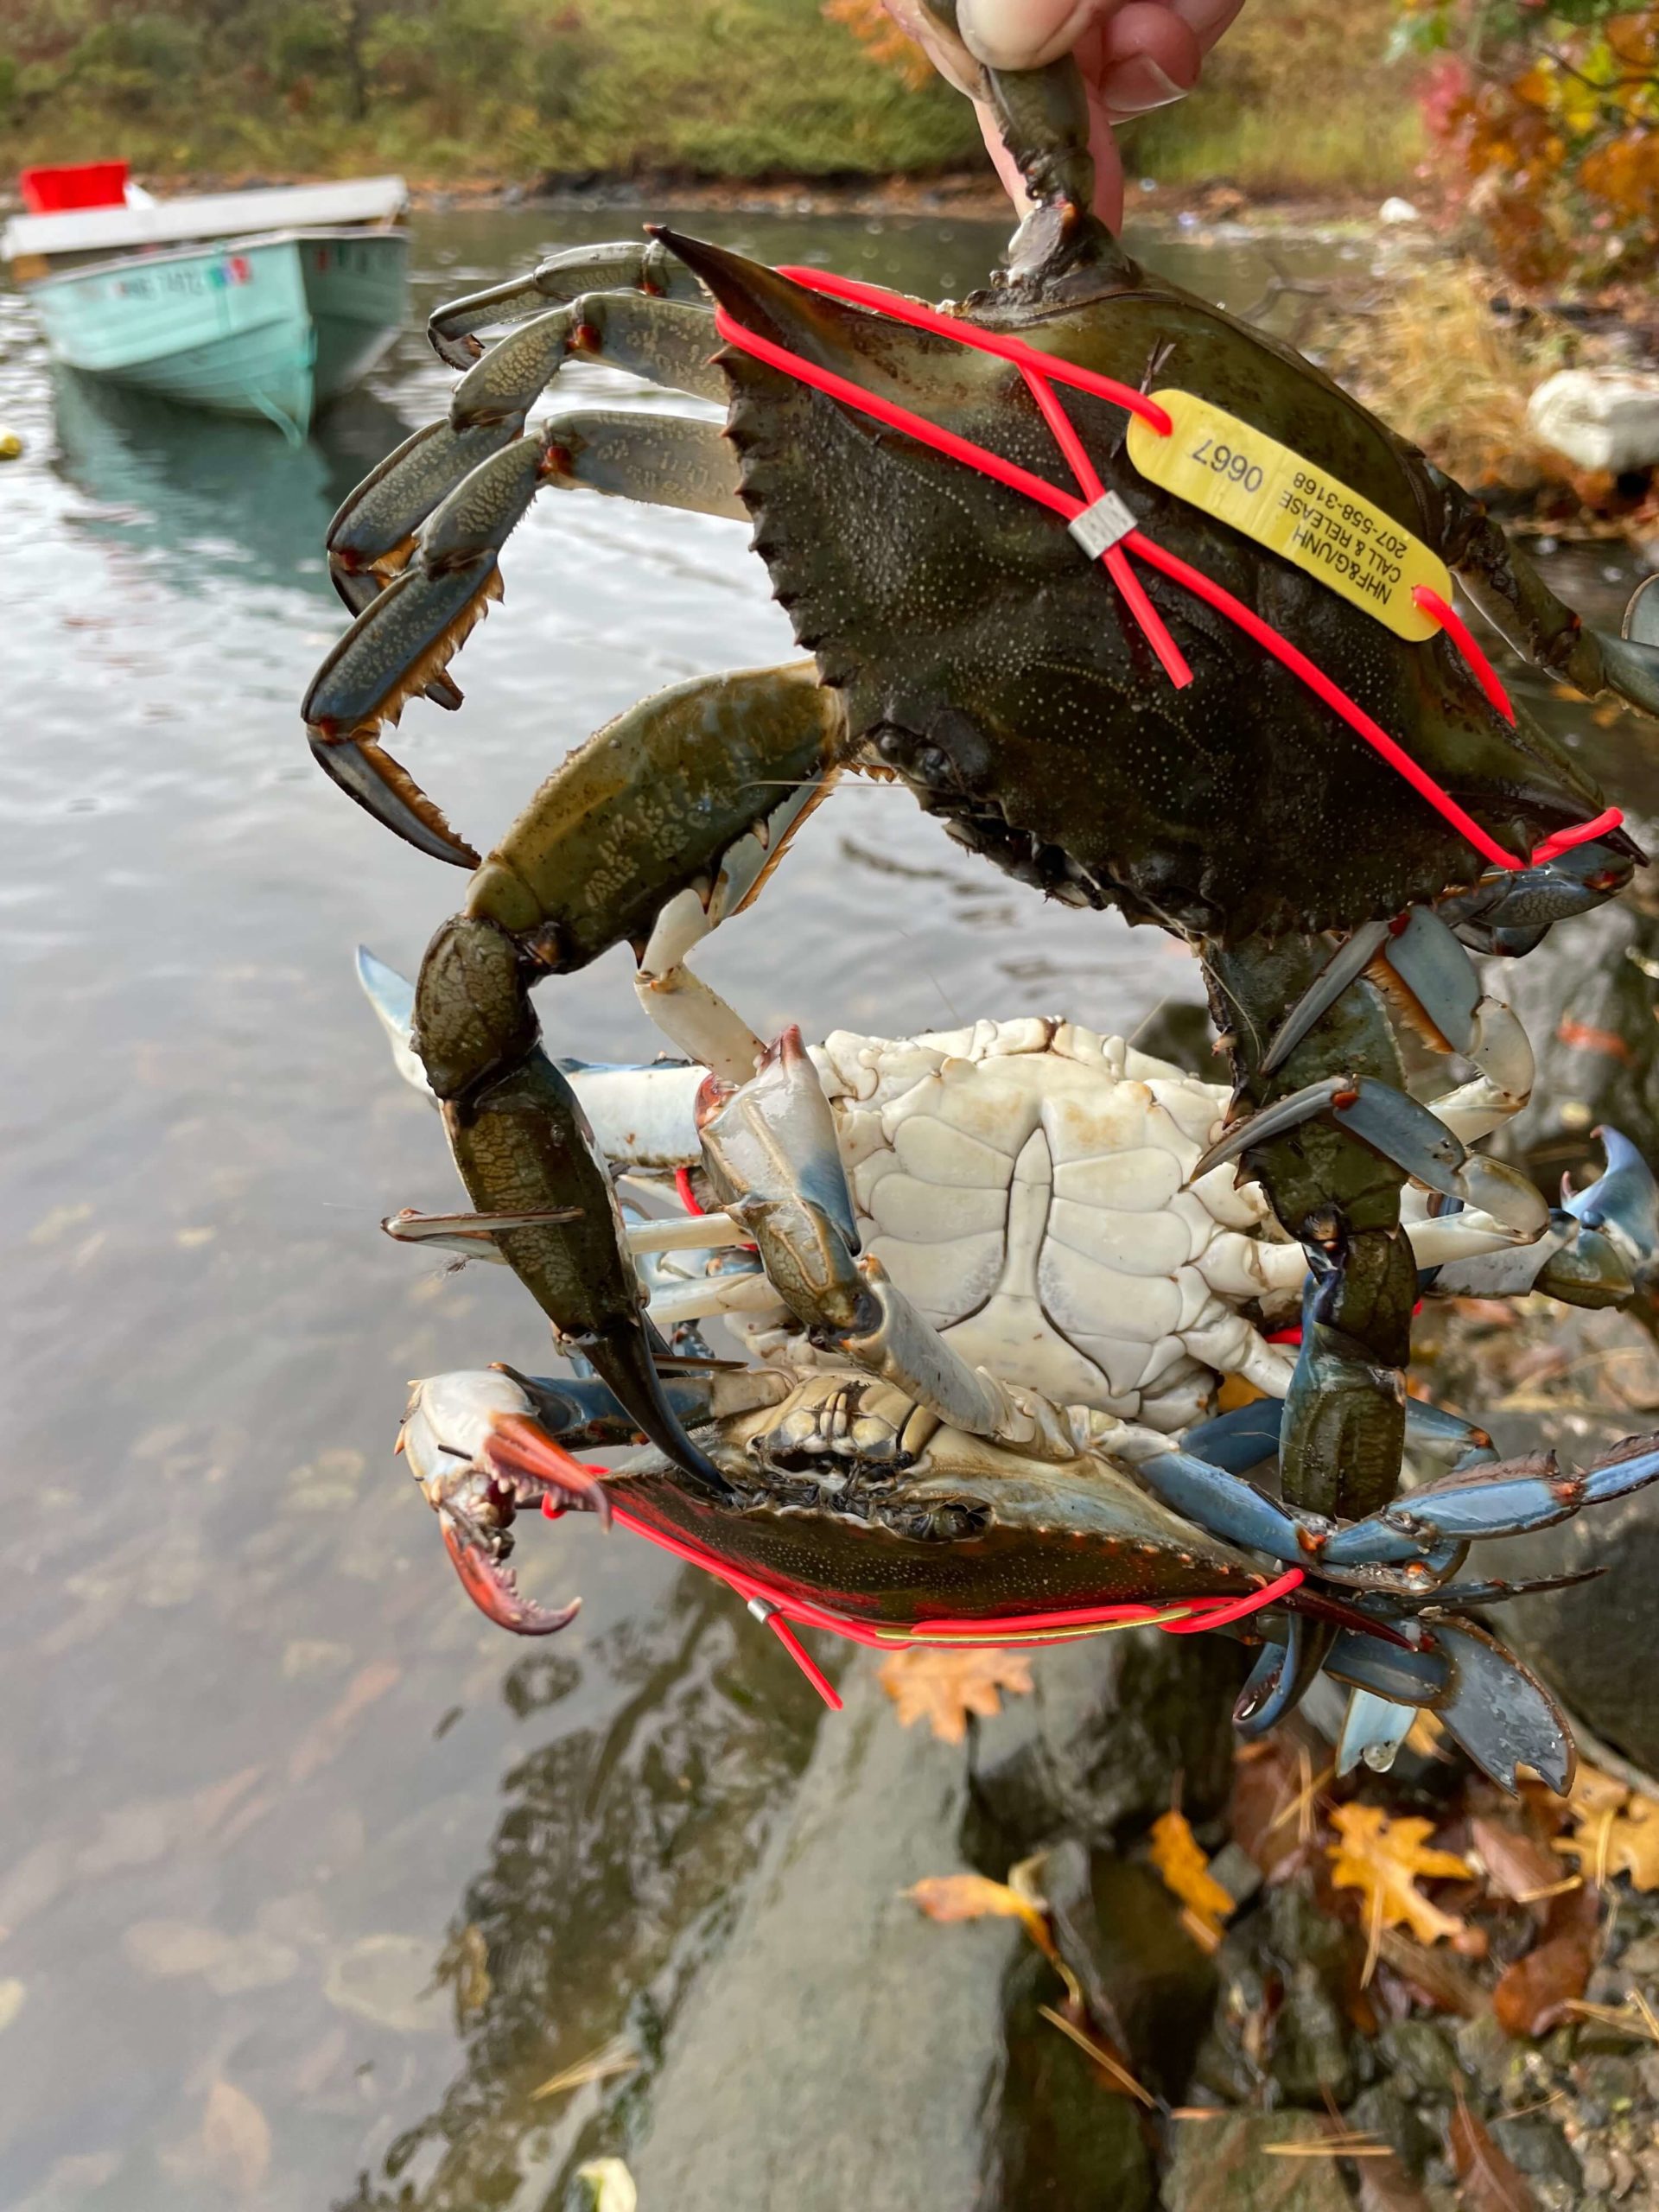 A blue crab marked with an identification tag.